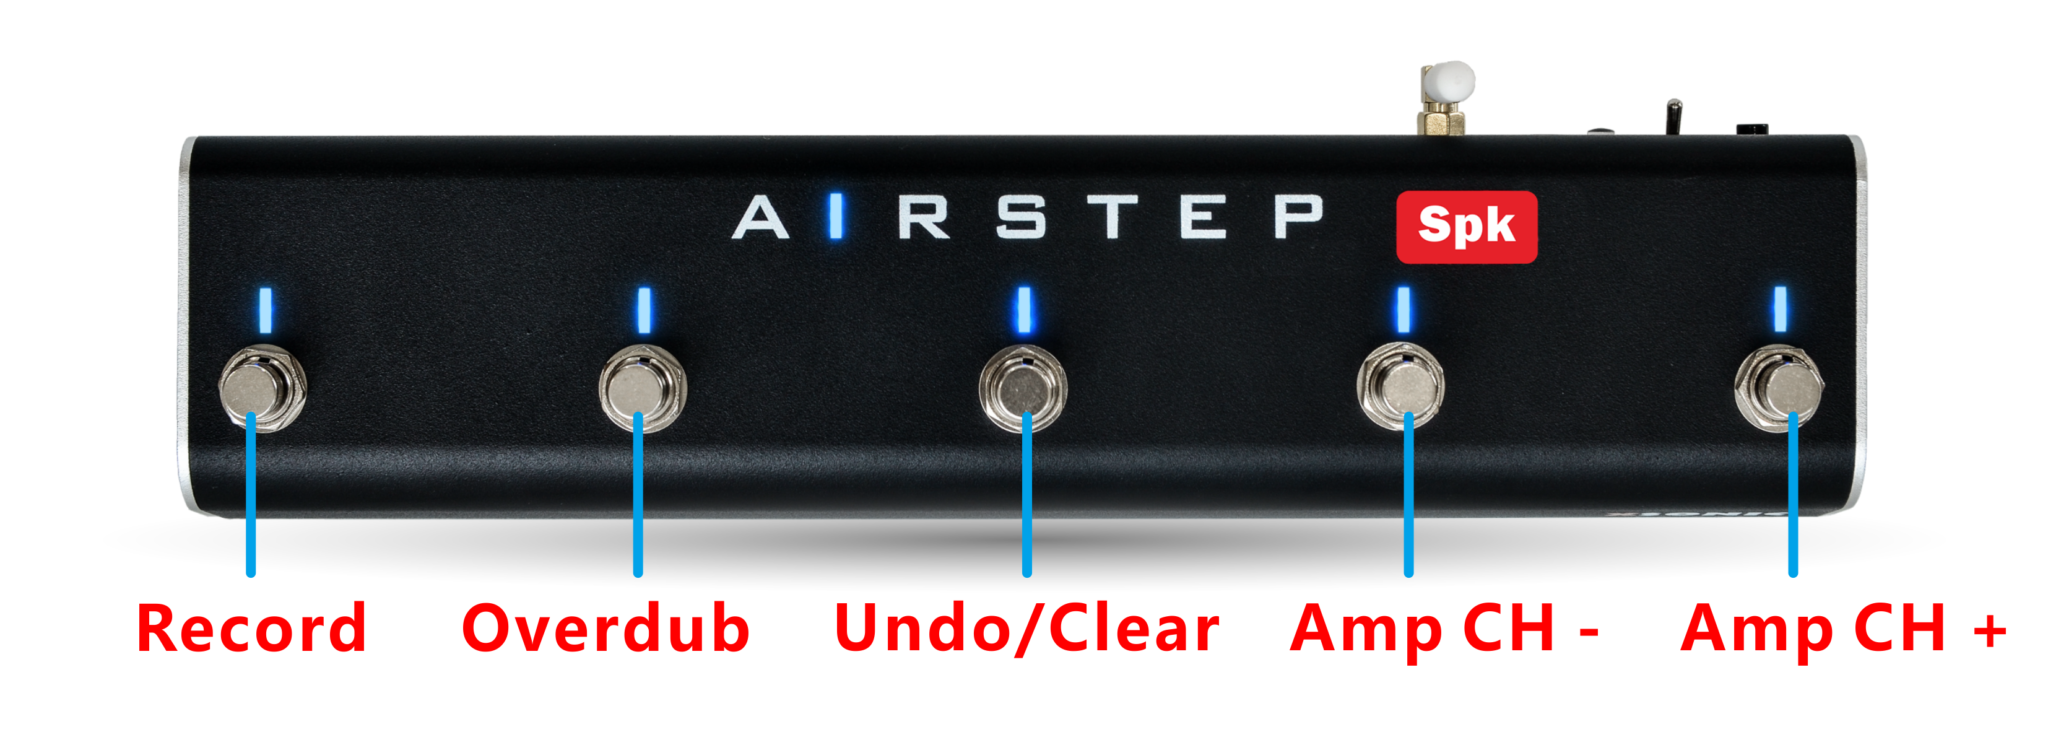 airstep footswitch for spark amp